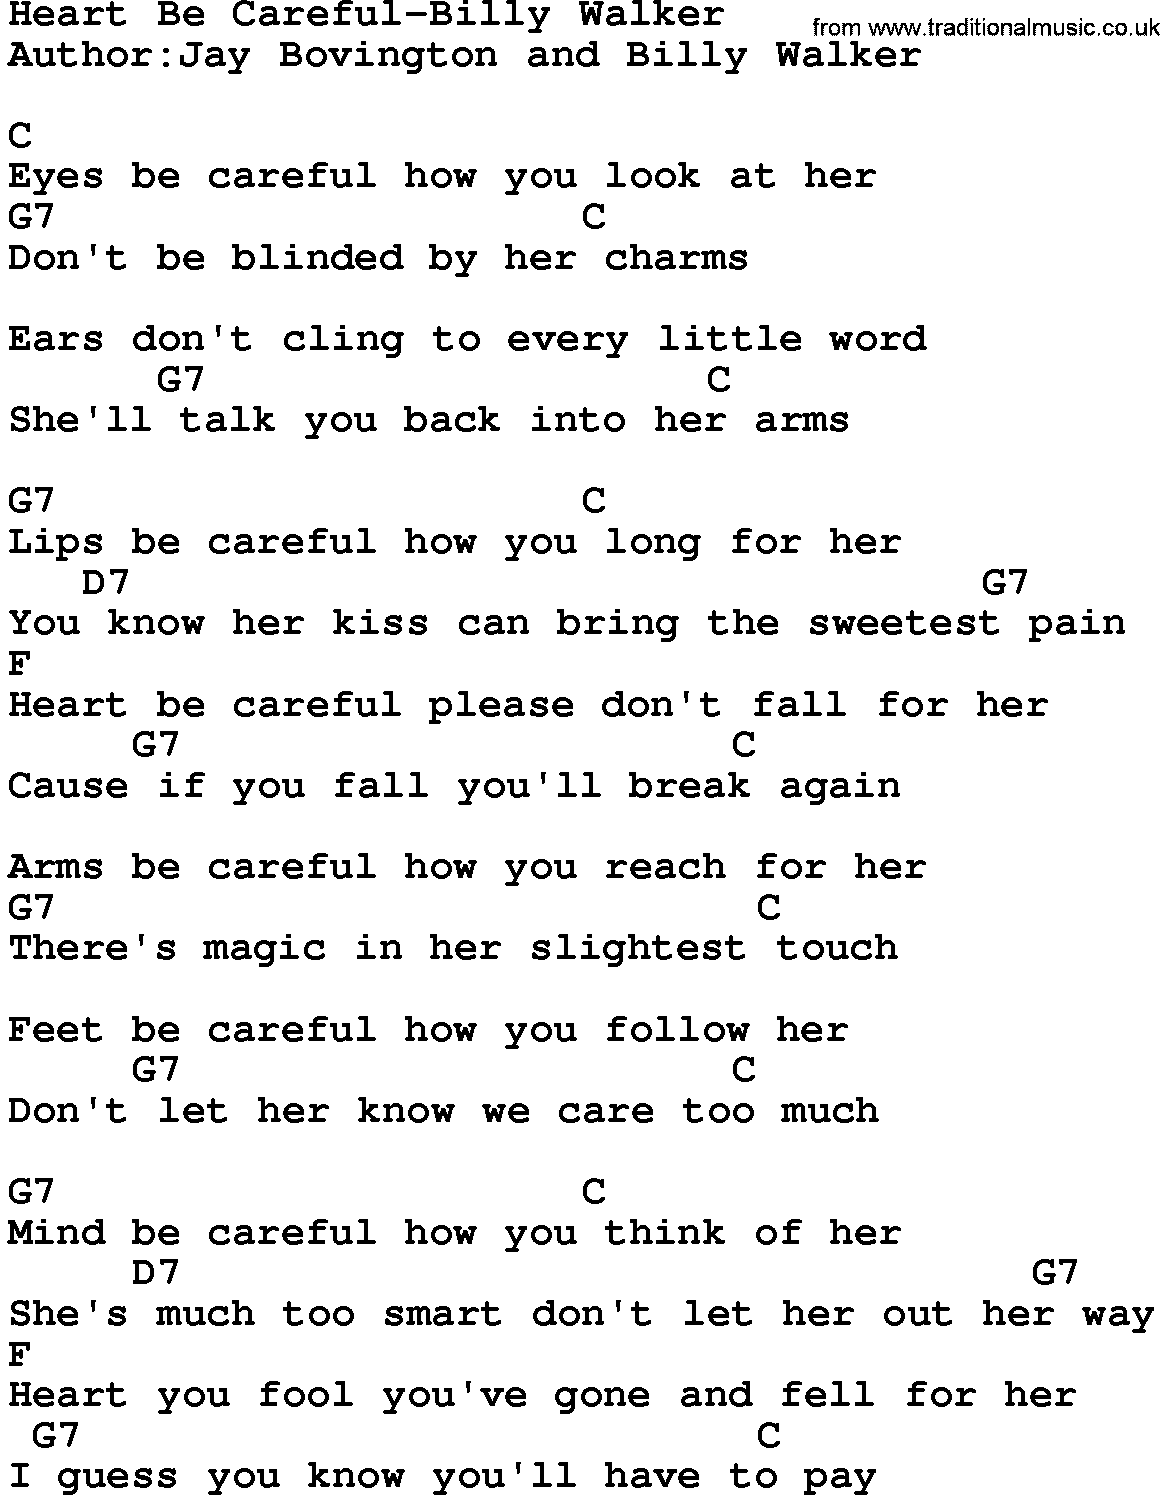 Country music song: Heart Be Careful-Billy Walker lyrics and chords